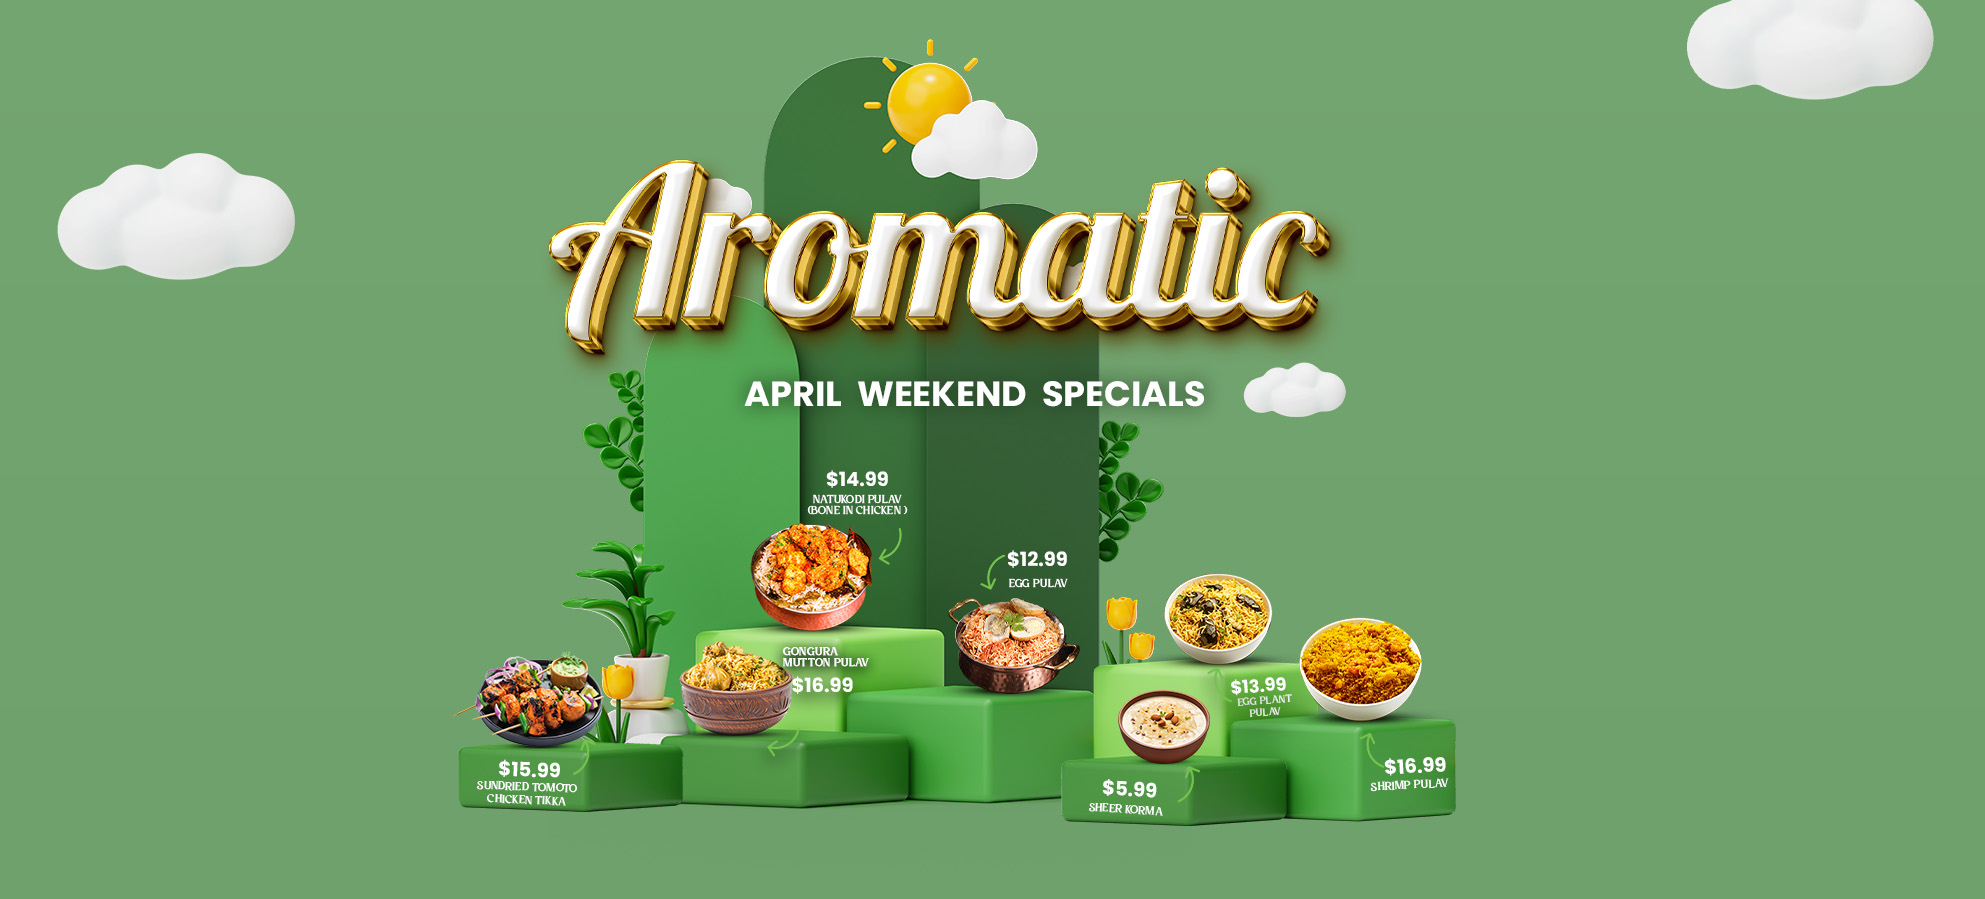 Aromatic April Weekend Specials